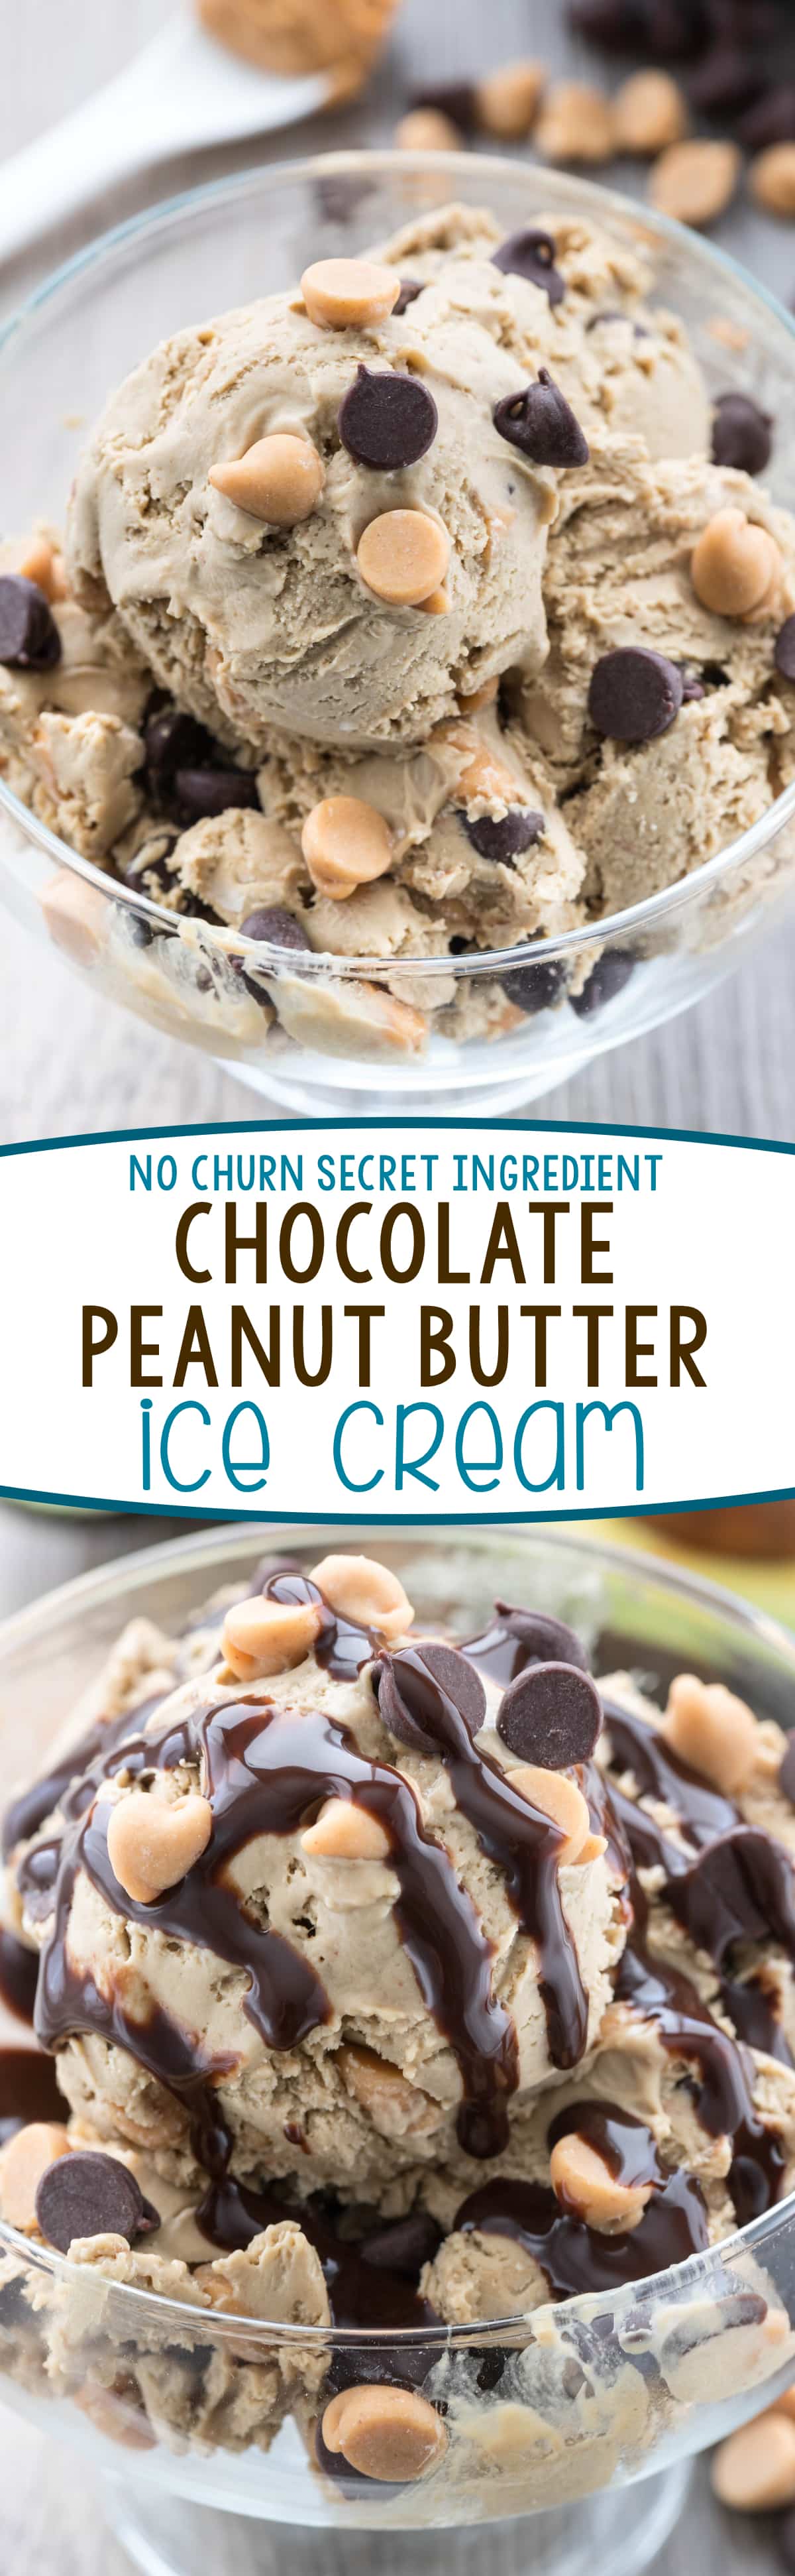 Easy No Churn Chocolate Peanut Butter Ice Cream - this easy ice cream recipe has a secret ingredient to keep it smooth and creamy and is FULL of chocolate peanut butter flavor!